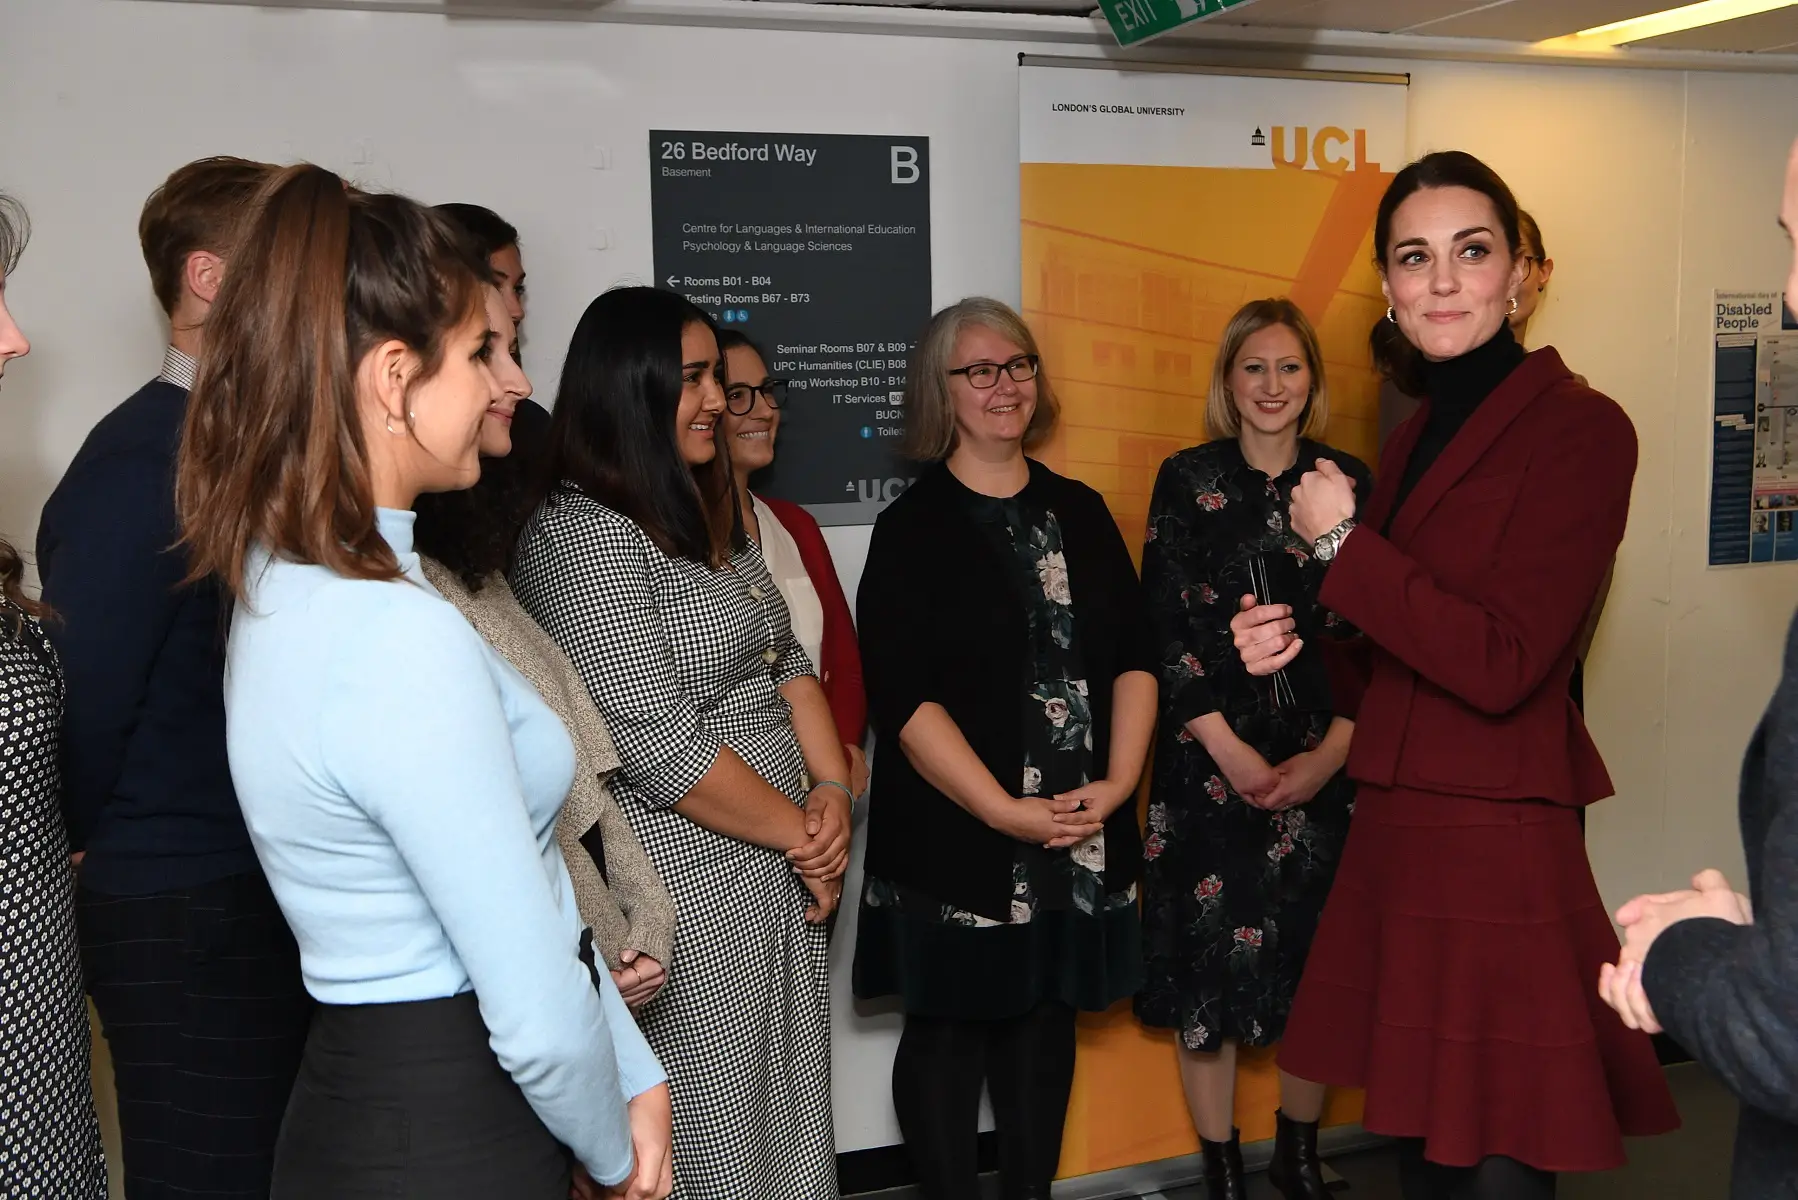 Duchess of Cambridge Catherine met with UCL Developmental Risk & Resilience Unit staff, and students from the Psychology and Language Science